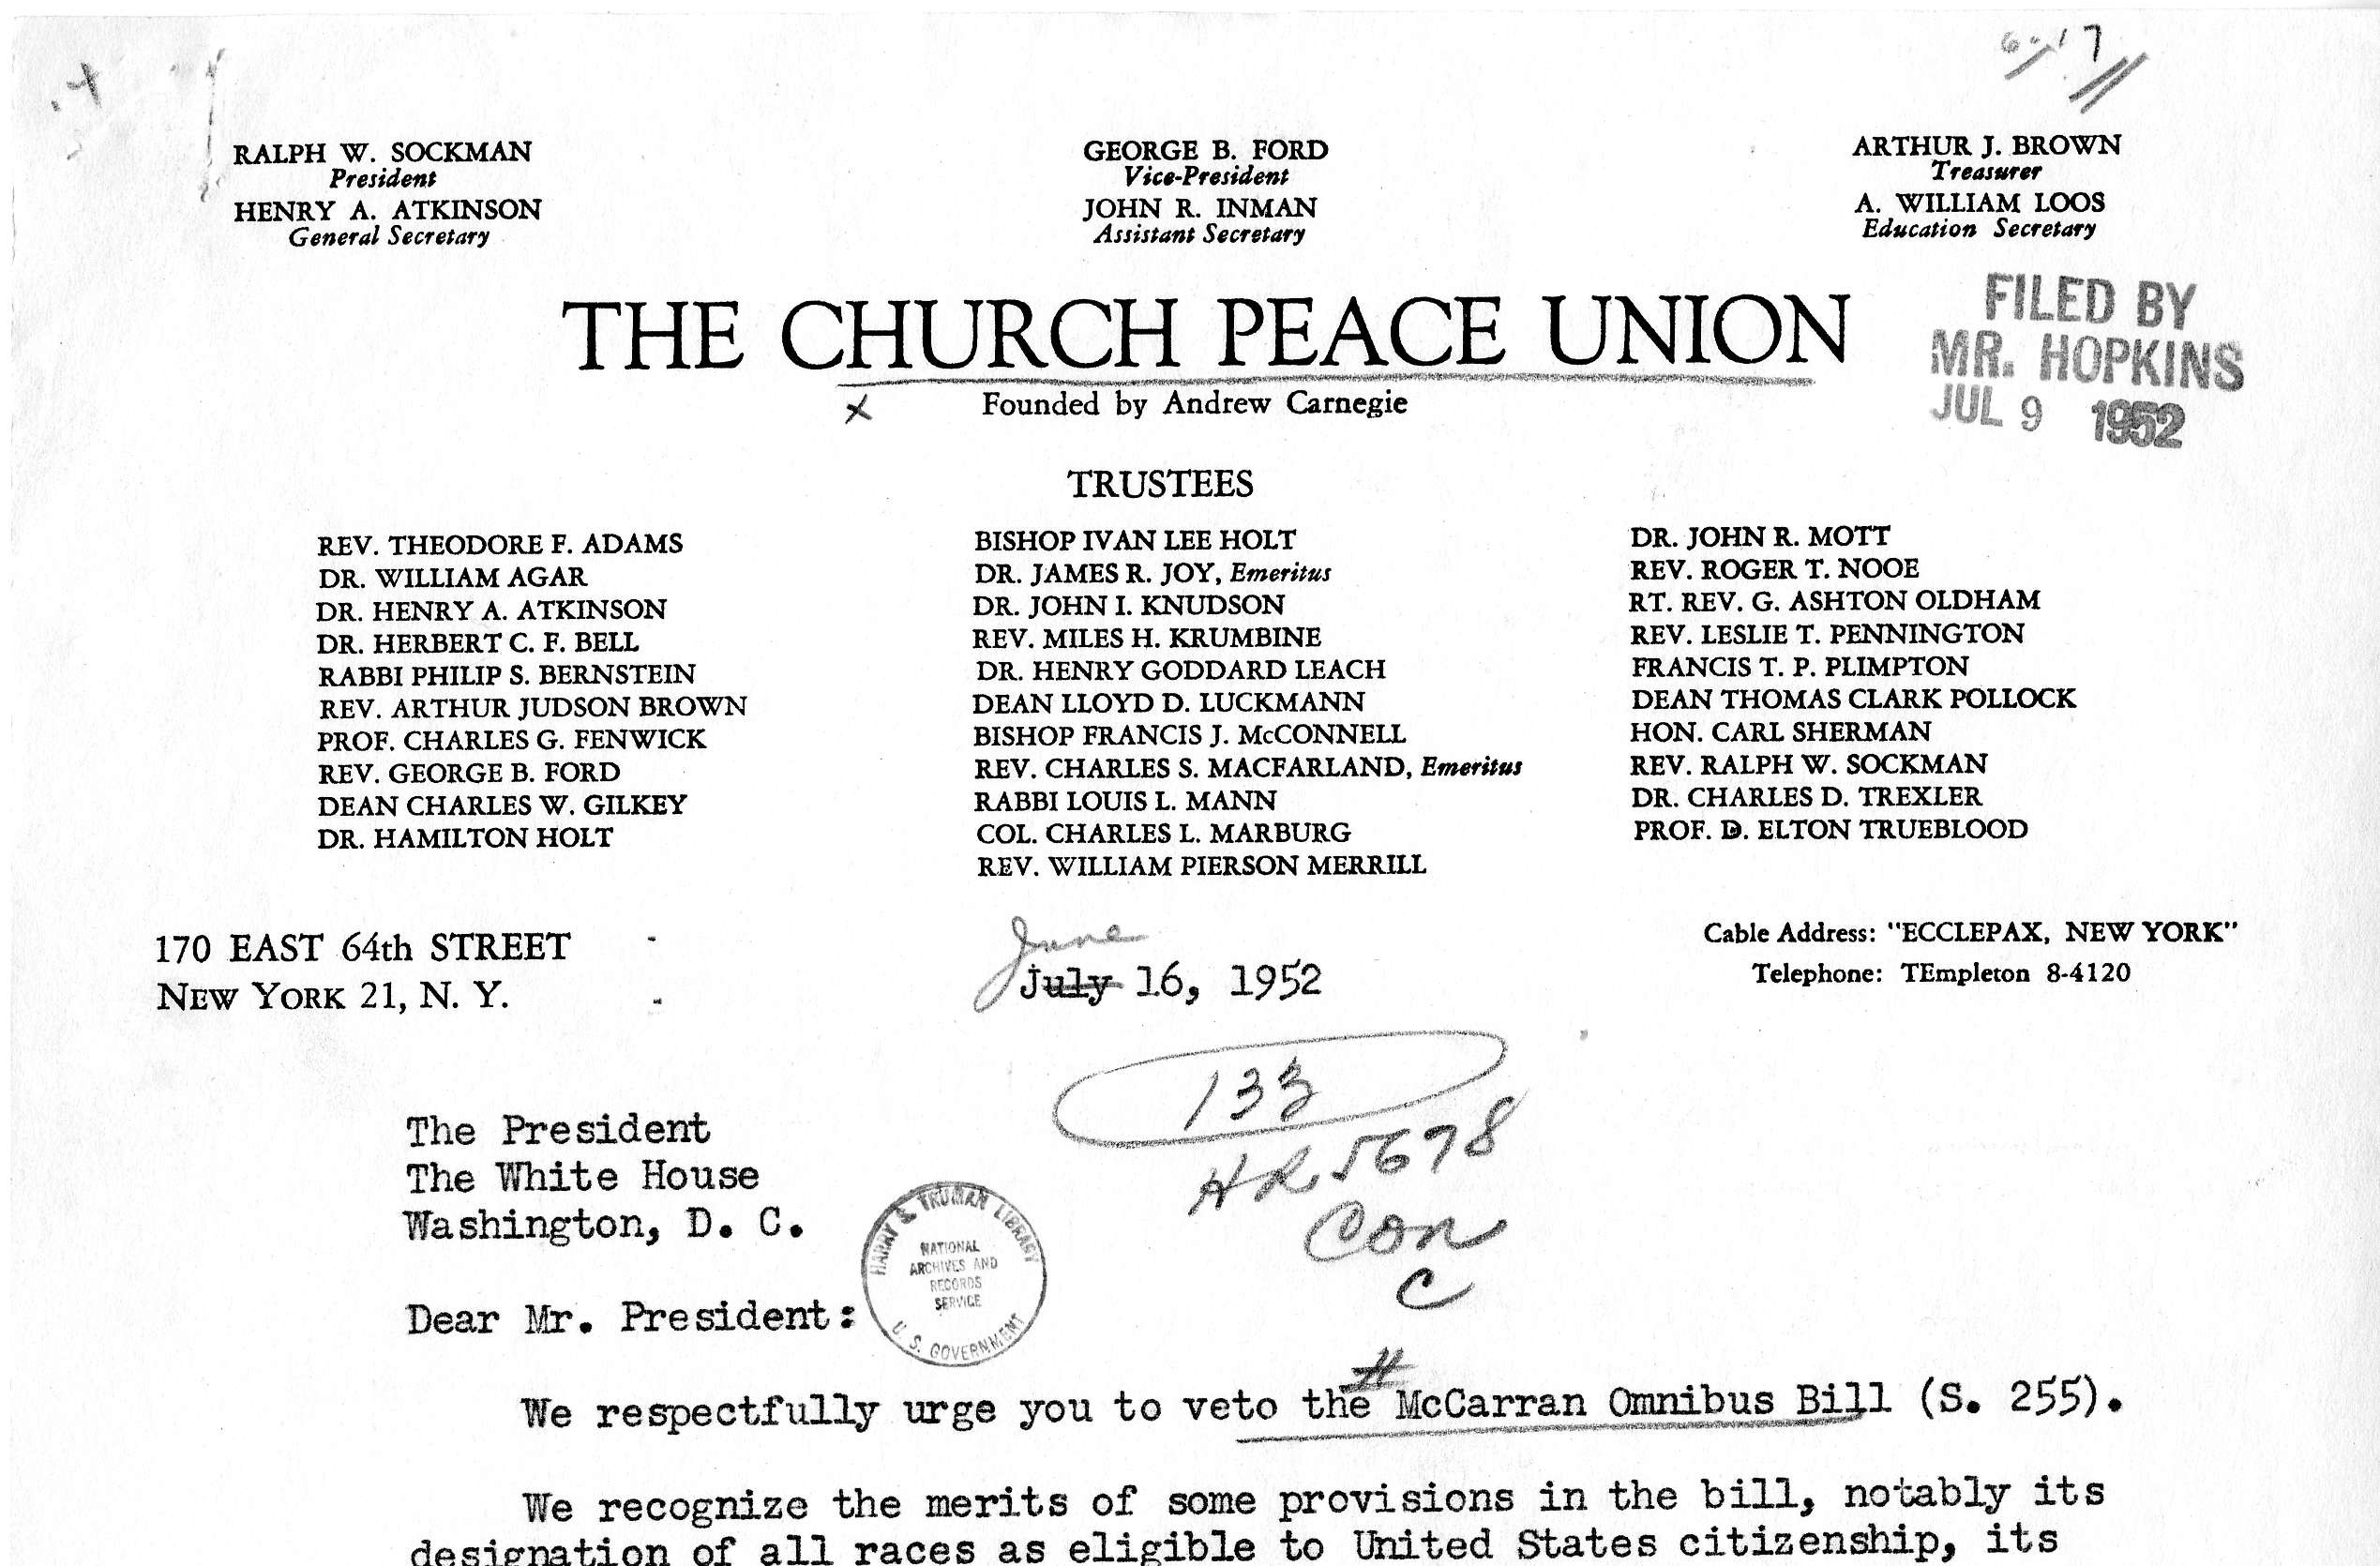 Letter from Ralph W. Sockman and Henry A. Atkinson to President Truman